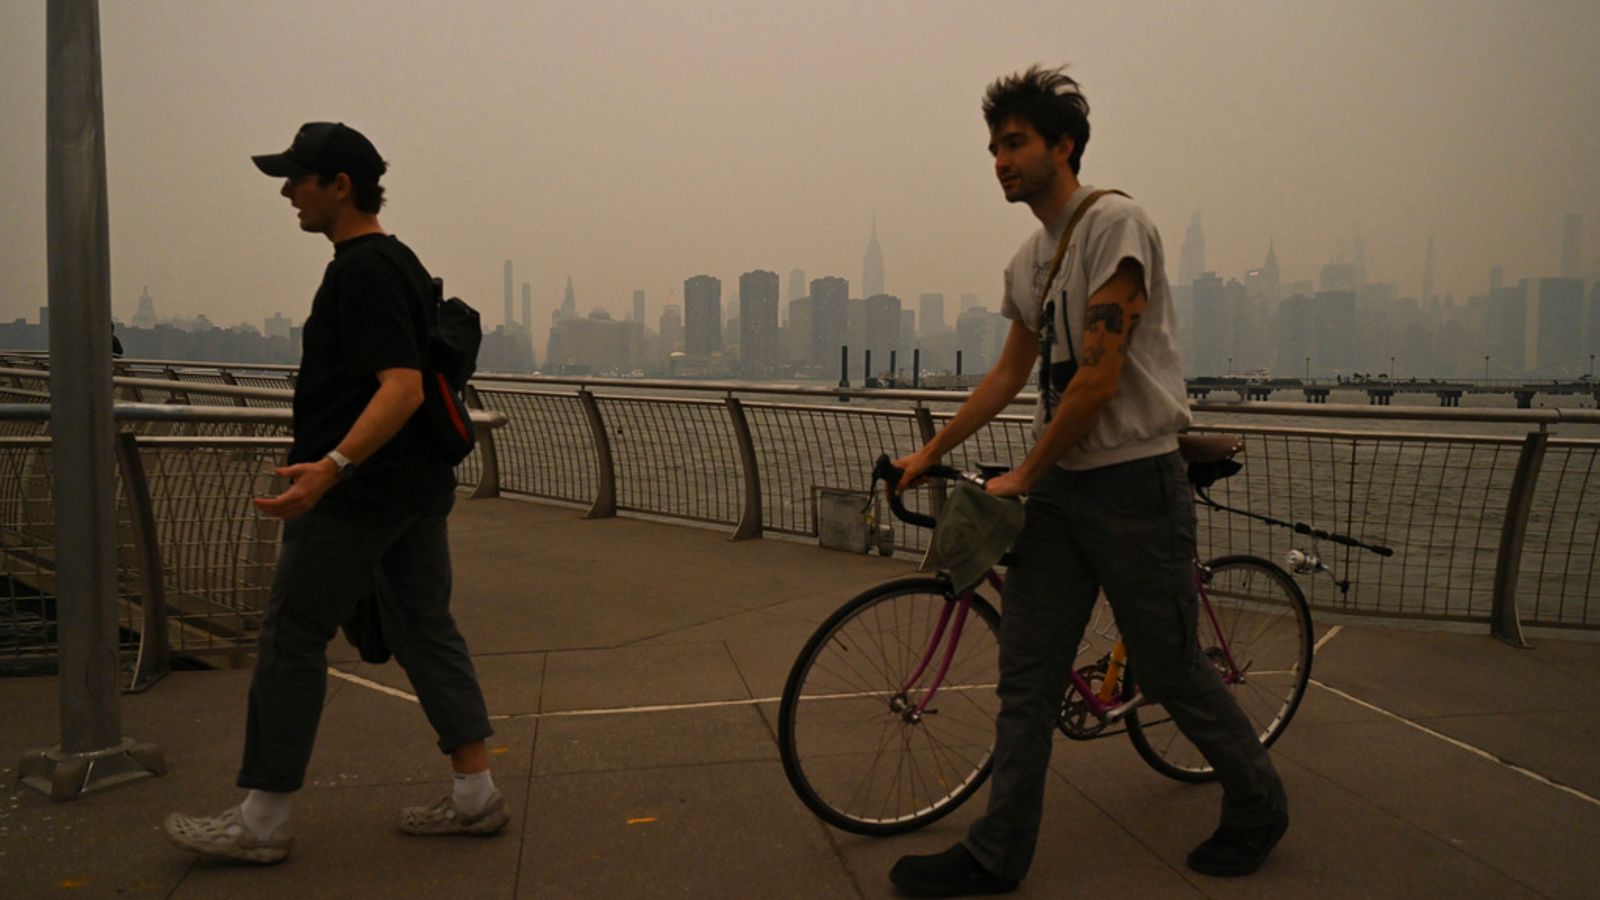 New York issues air quality alert as smoke from Canadian wildfires shrouds landmarks